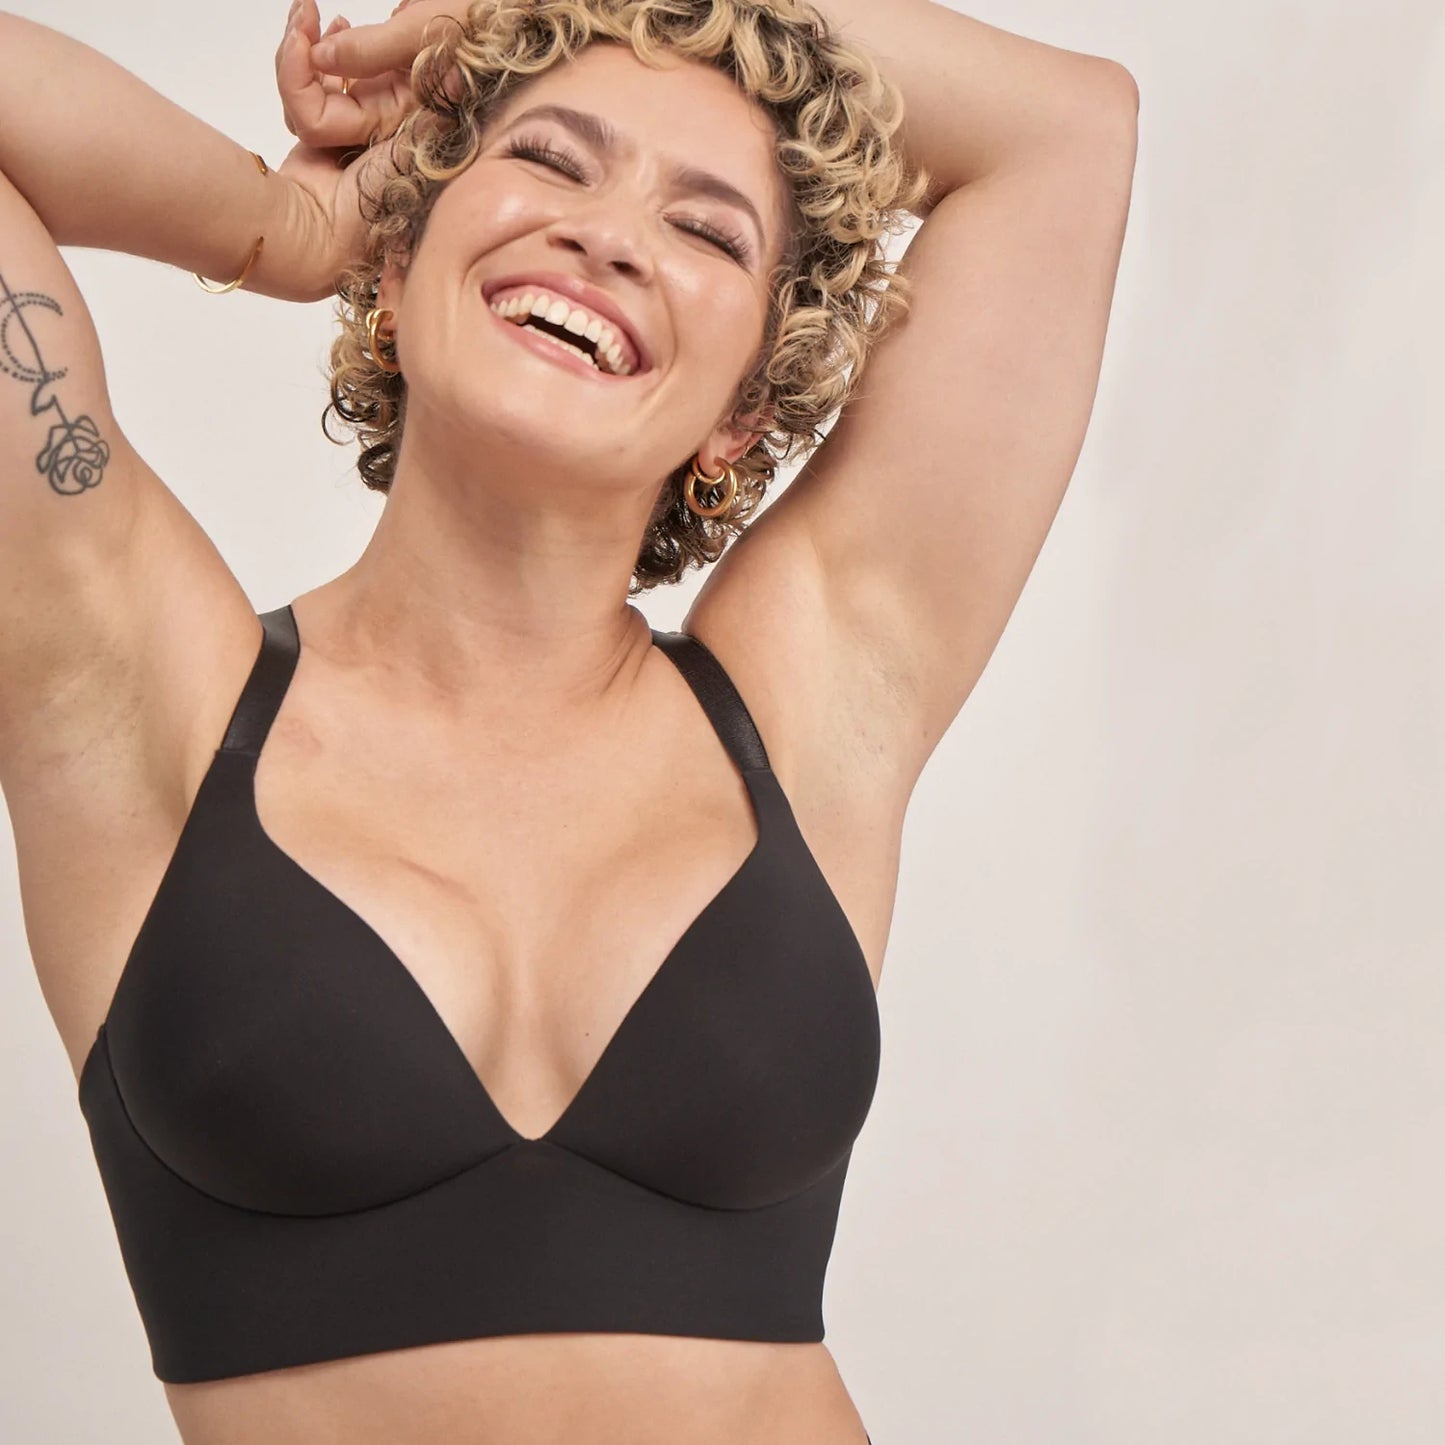 Trish Moulded Cup Bra by AnaOno | Black | Underwear for women touched by breast cancer